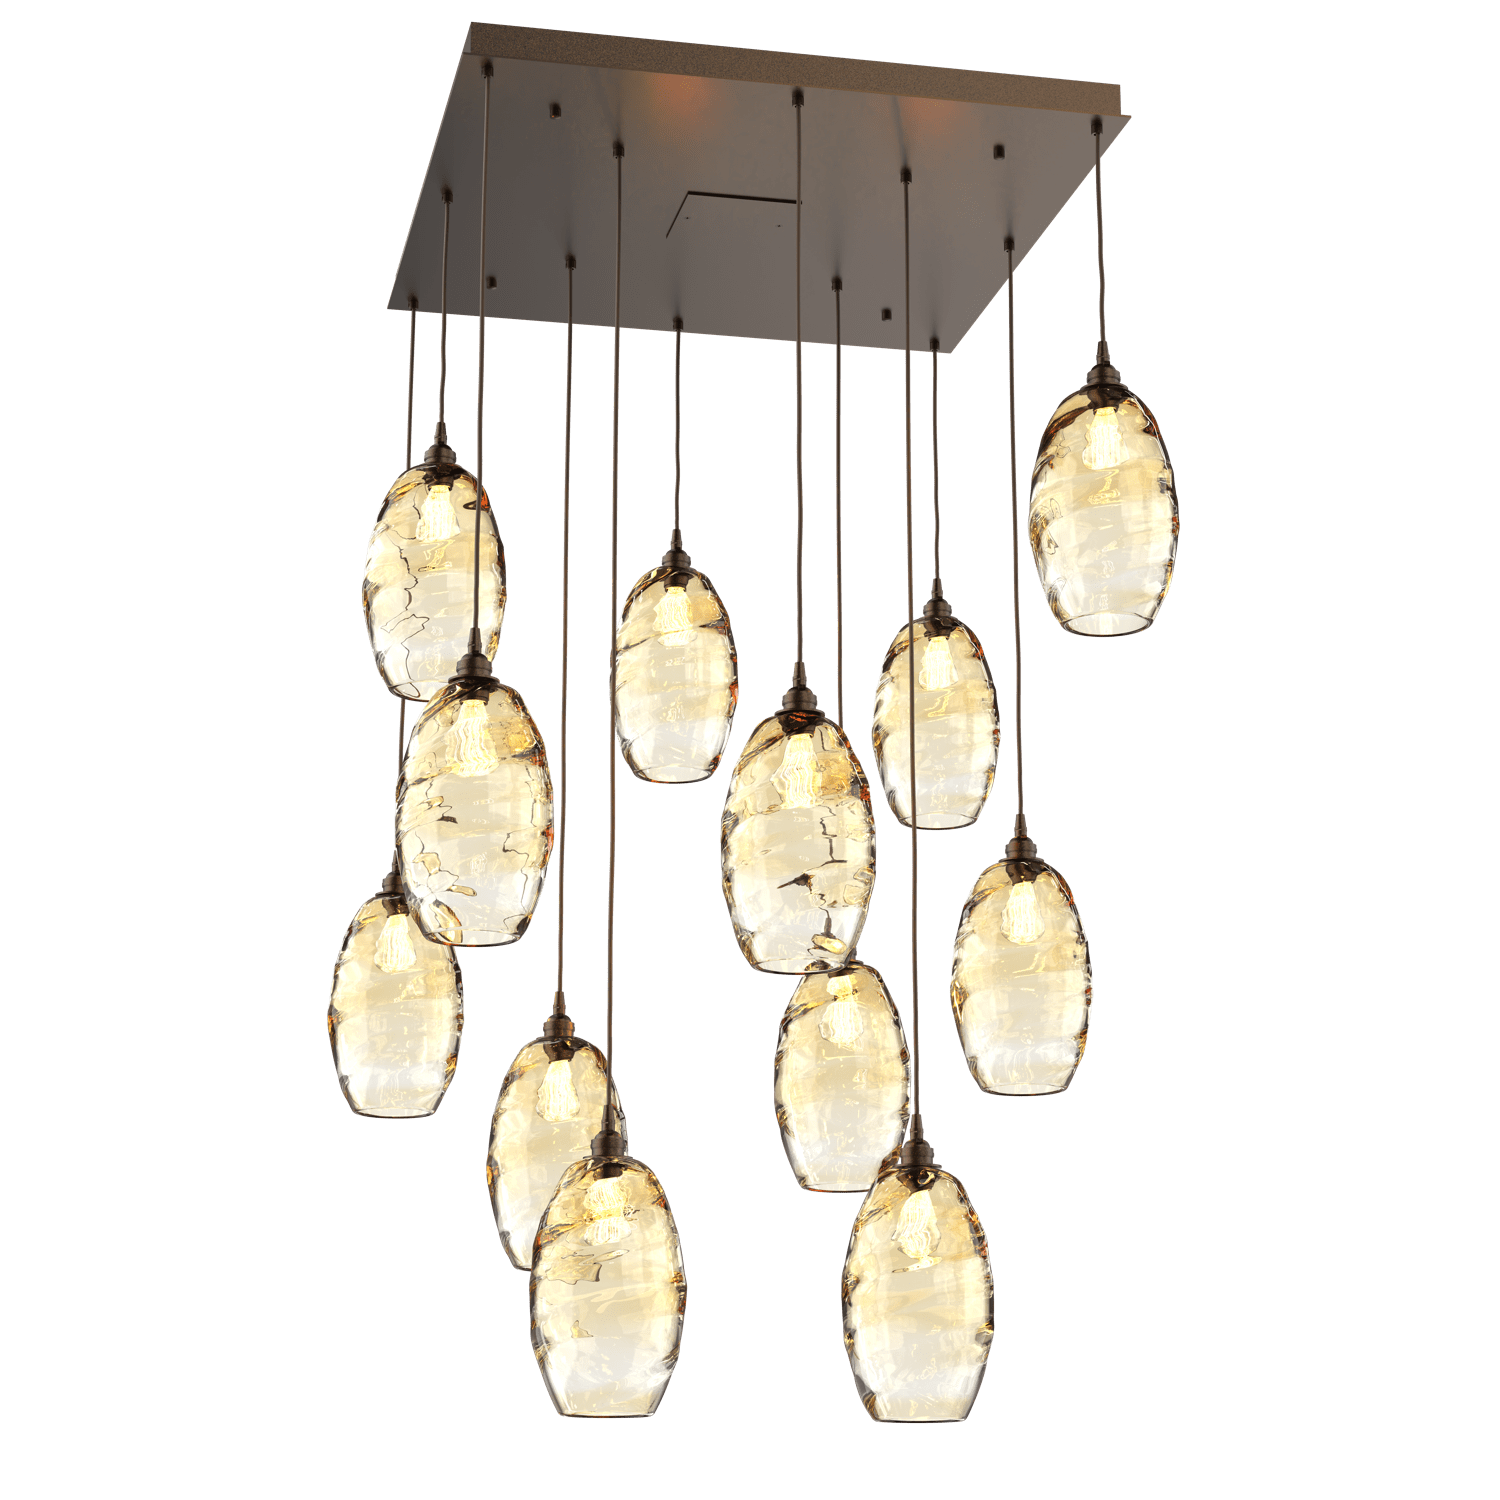 CHB0035-12-FB-OA-Hammerton-Studio-Optic-Blown-Glass-Elisse-12-light-square-pendant-chandelier-with-flat-bronze-finish-and-optic-amber-blown-glass-shades-and-incandescent-lamping